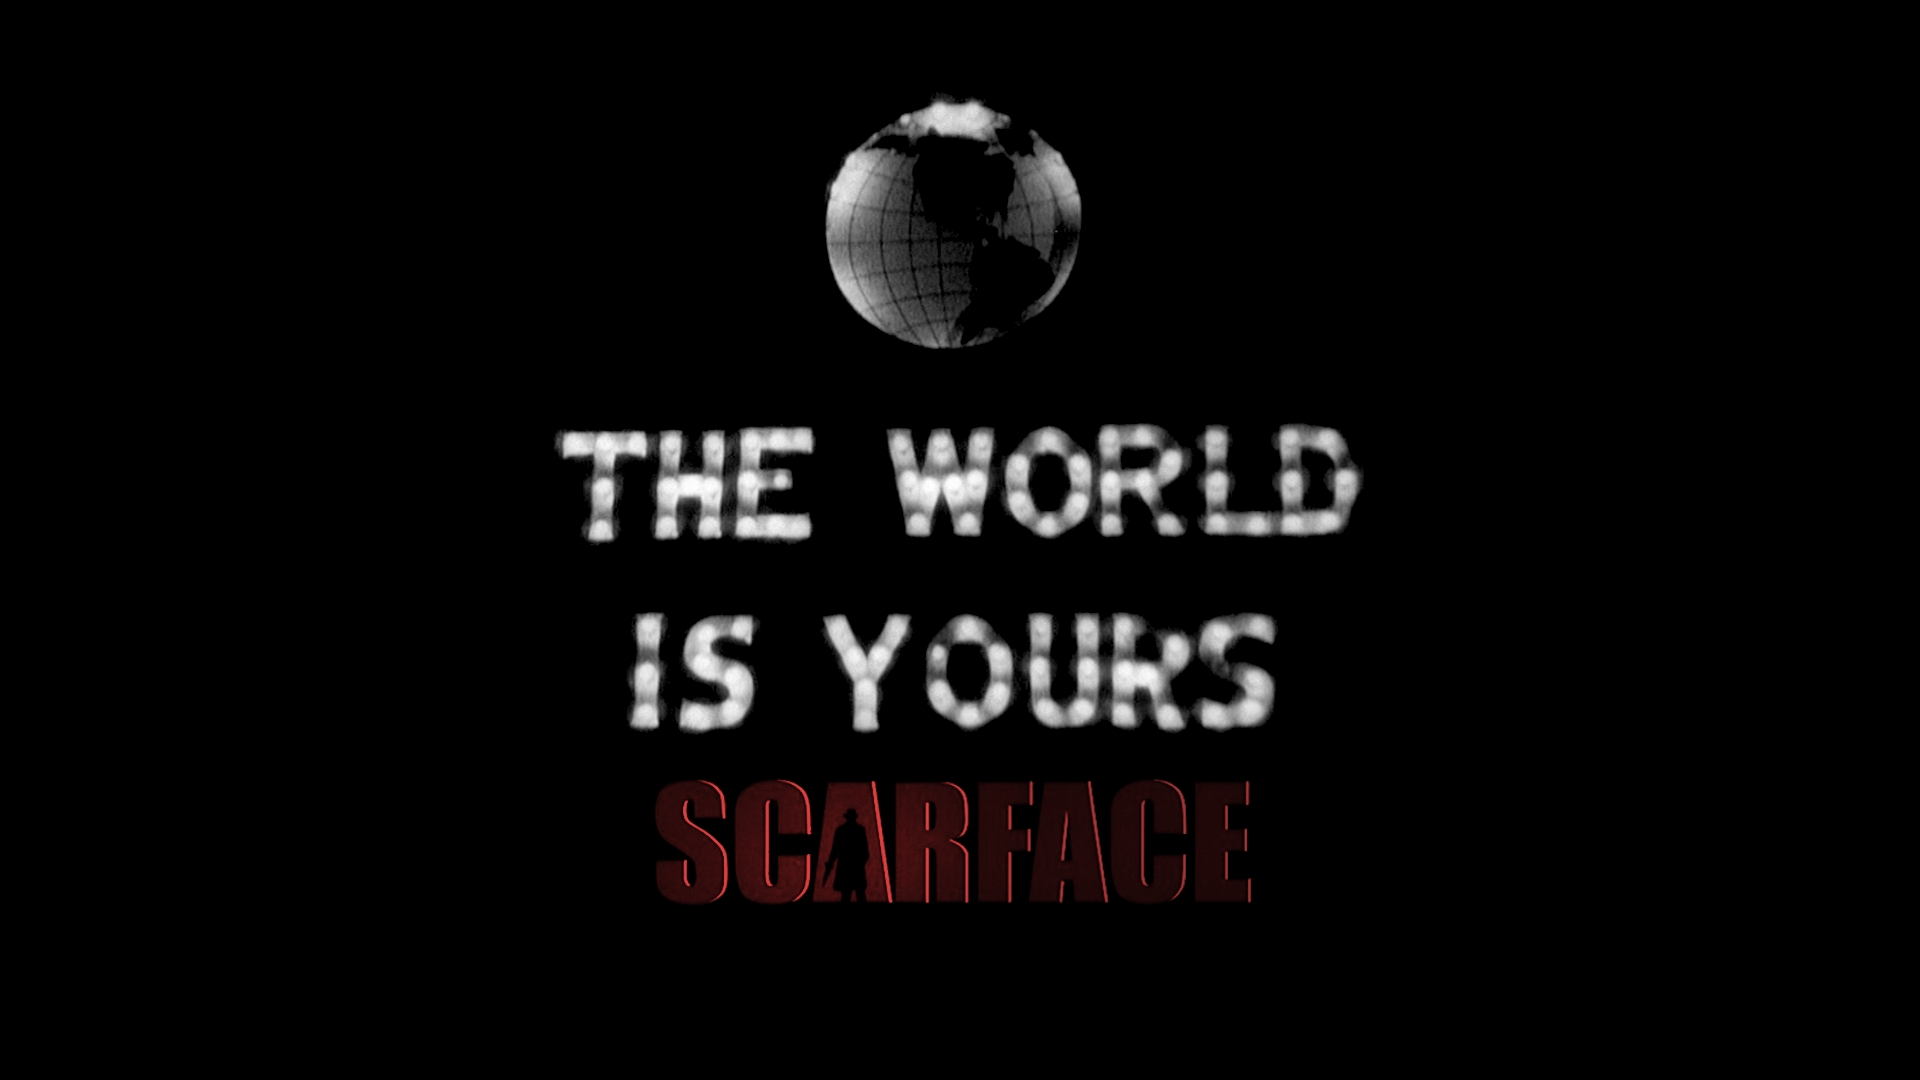 Scarface The World Is Yours Wallpaper